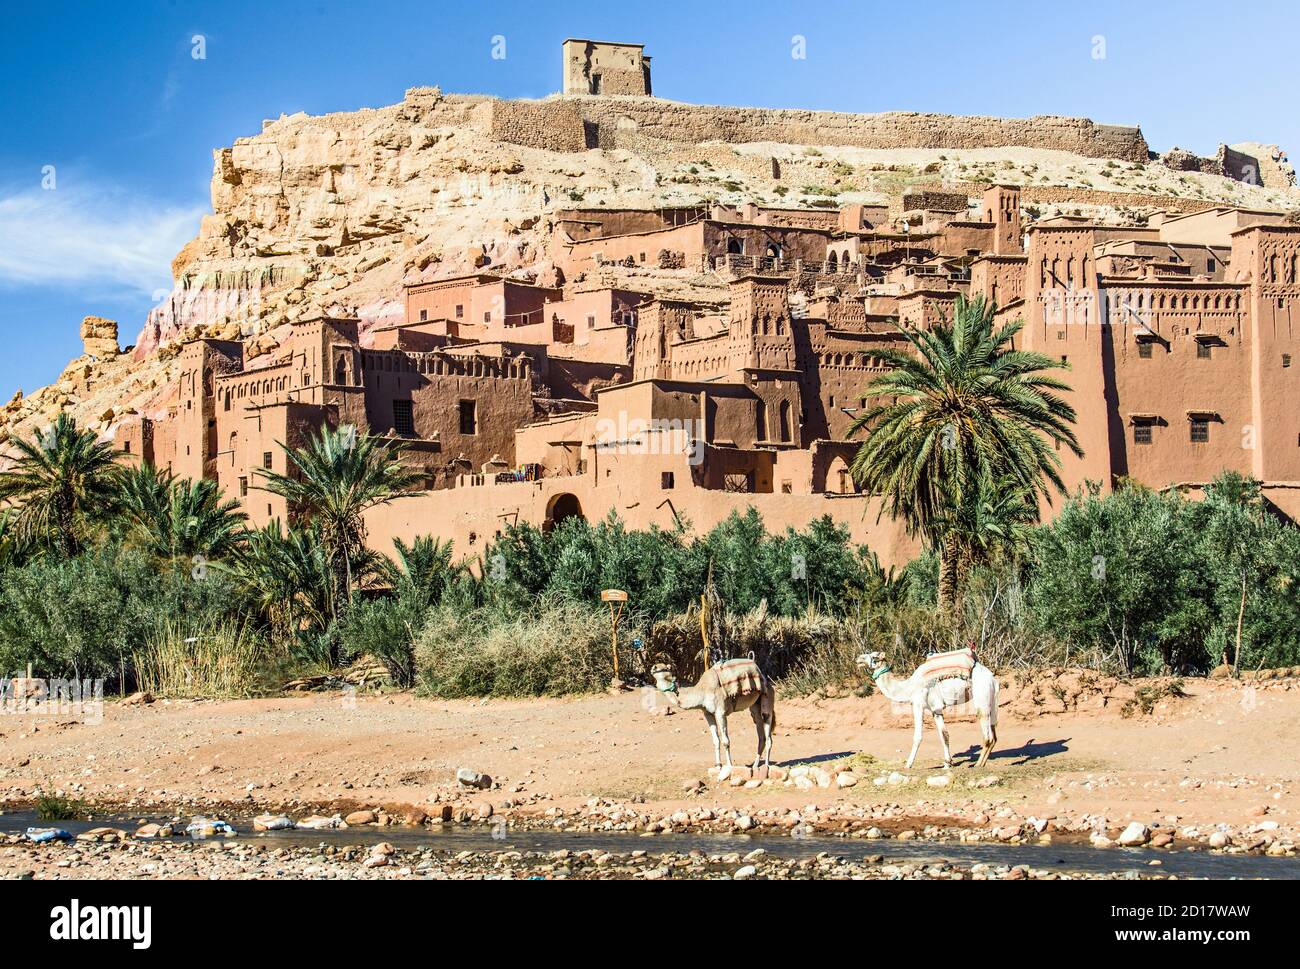 Scenic view of famous village: Ait ait ben haddou ingluding camels, palms and the dry river, Morocco Stock Photo